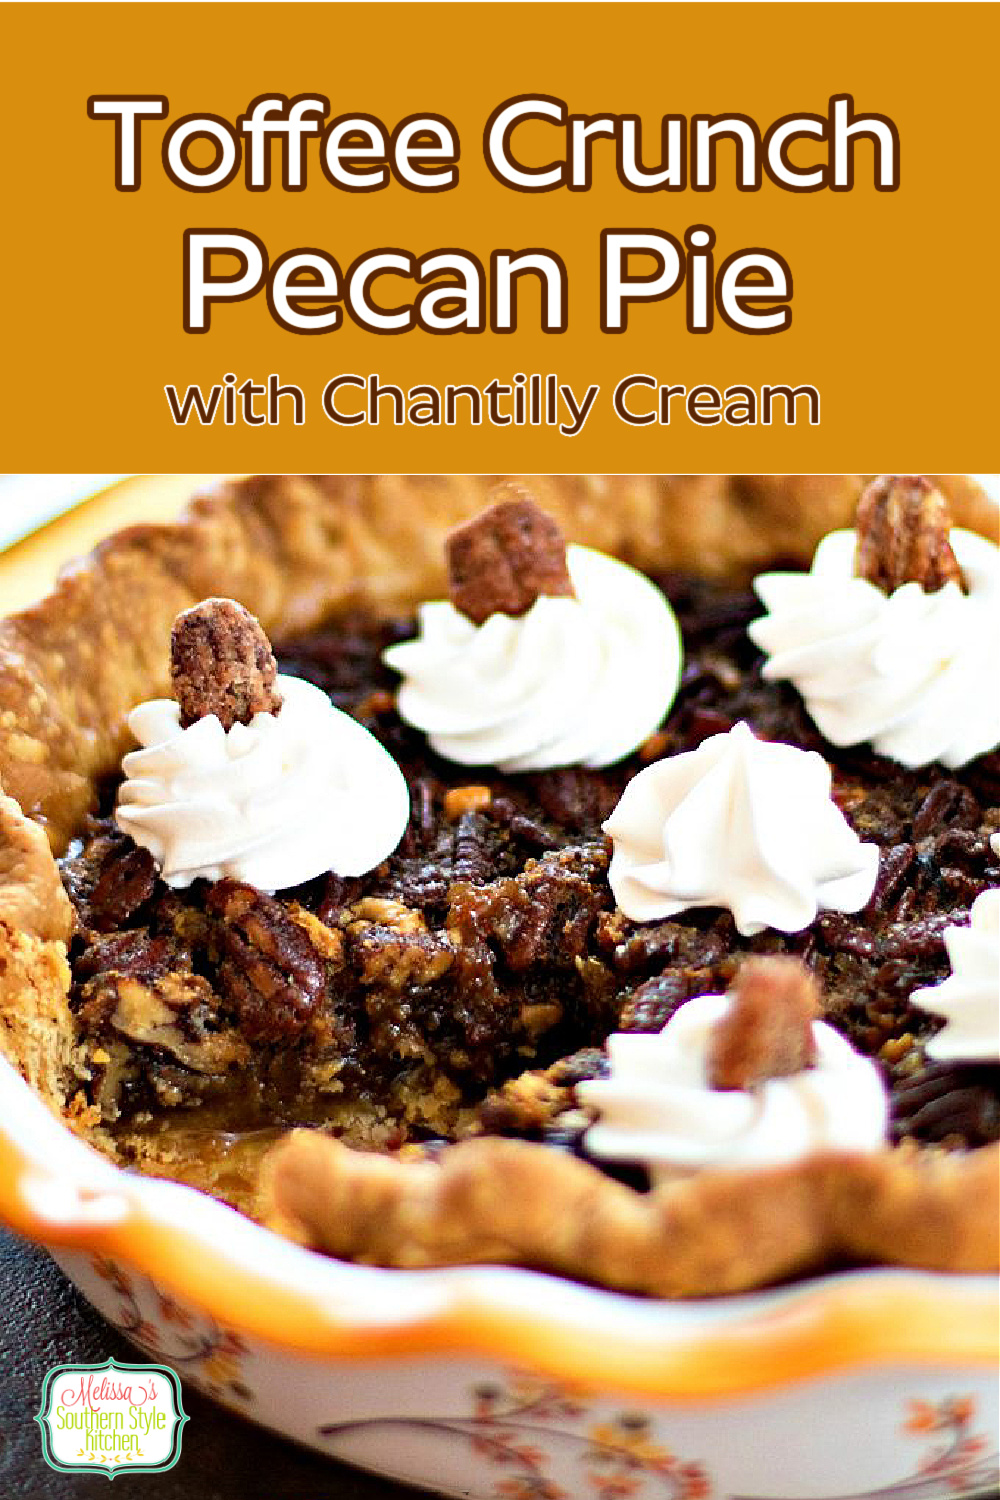 This Toffee Crunch Pecan Pie with Chantilly Cream is a tasty twist on classic Southern pecan pie #pecanpierecipes #pecanpie #toffeecrunchpie #toffeepecanpie #pies #thanksgivingpierecipes #desserts #pecans #holidayrecipes #pie #pecanrecipes